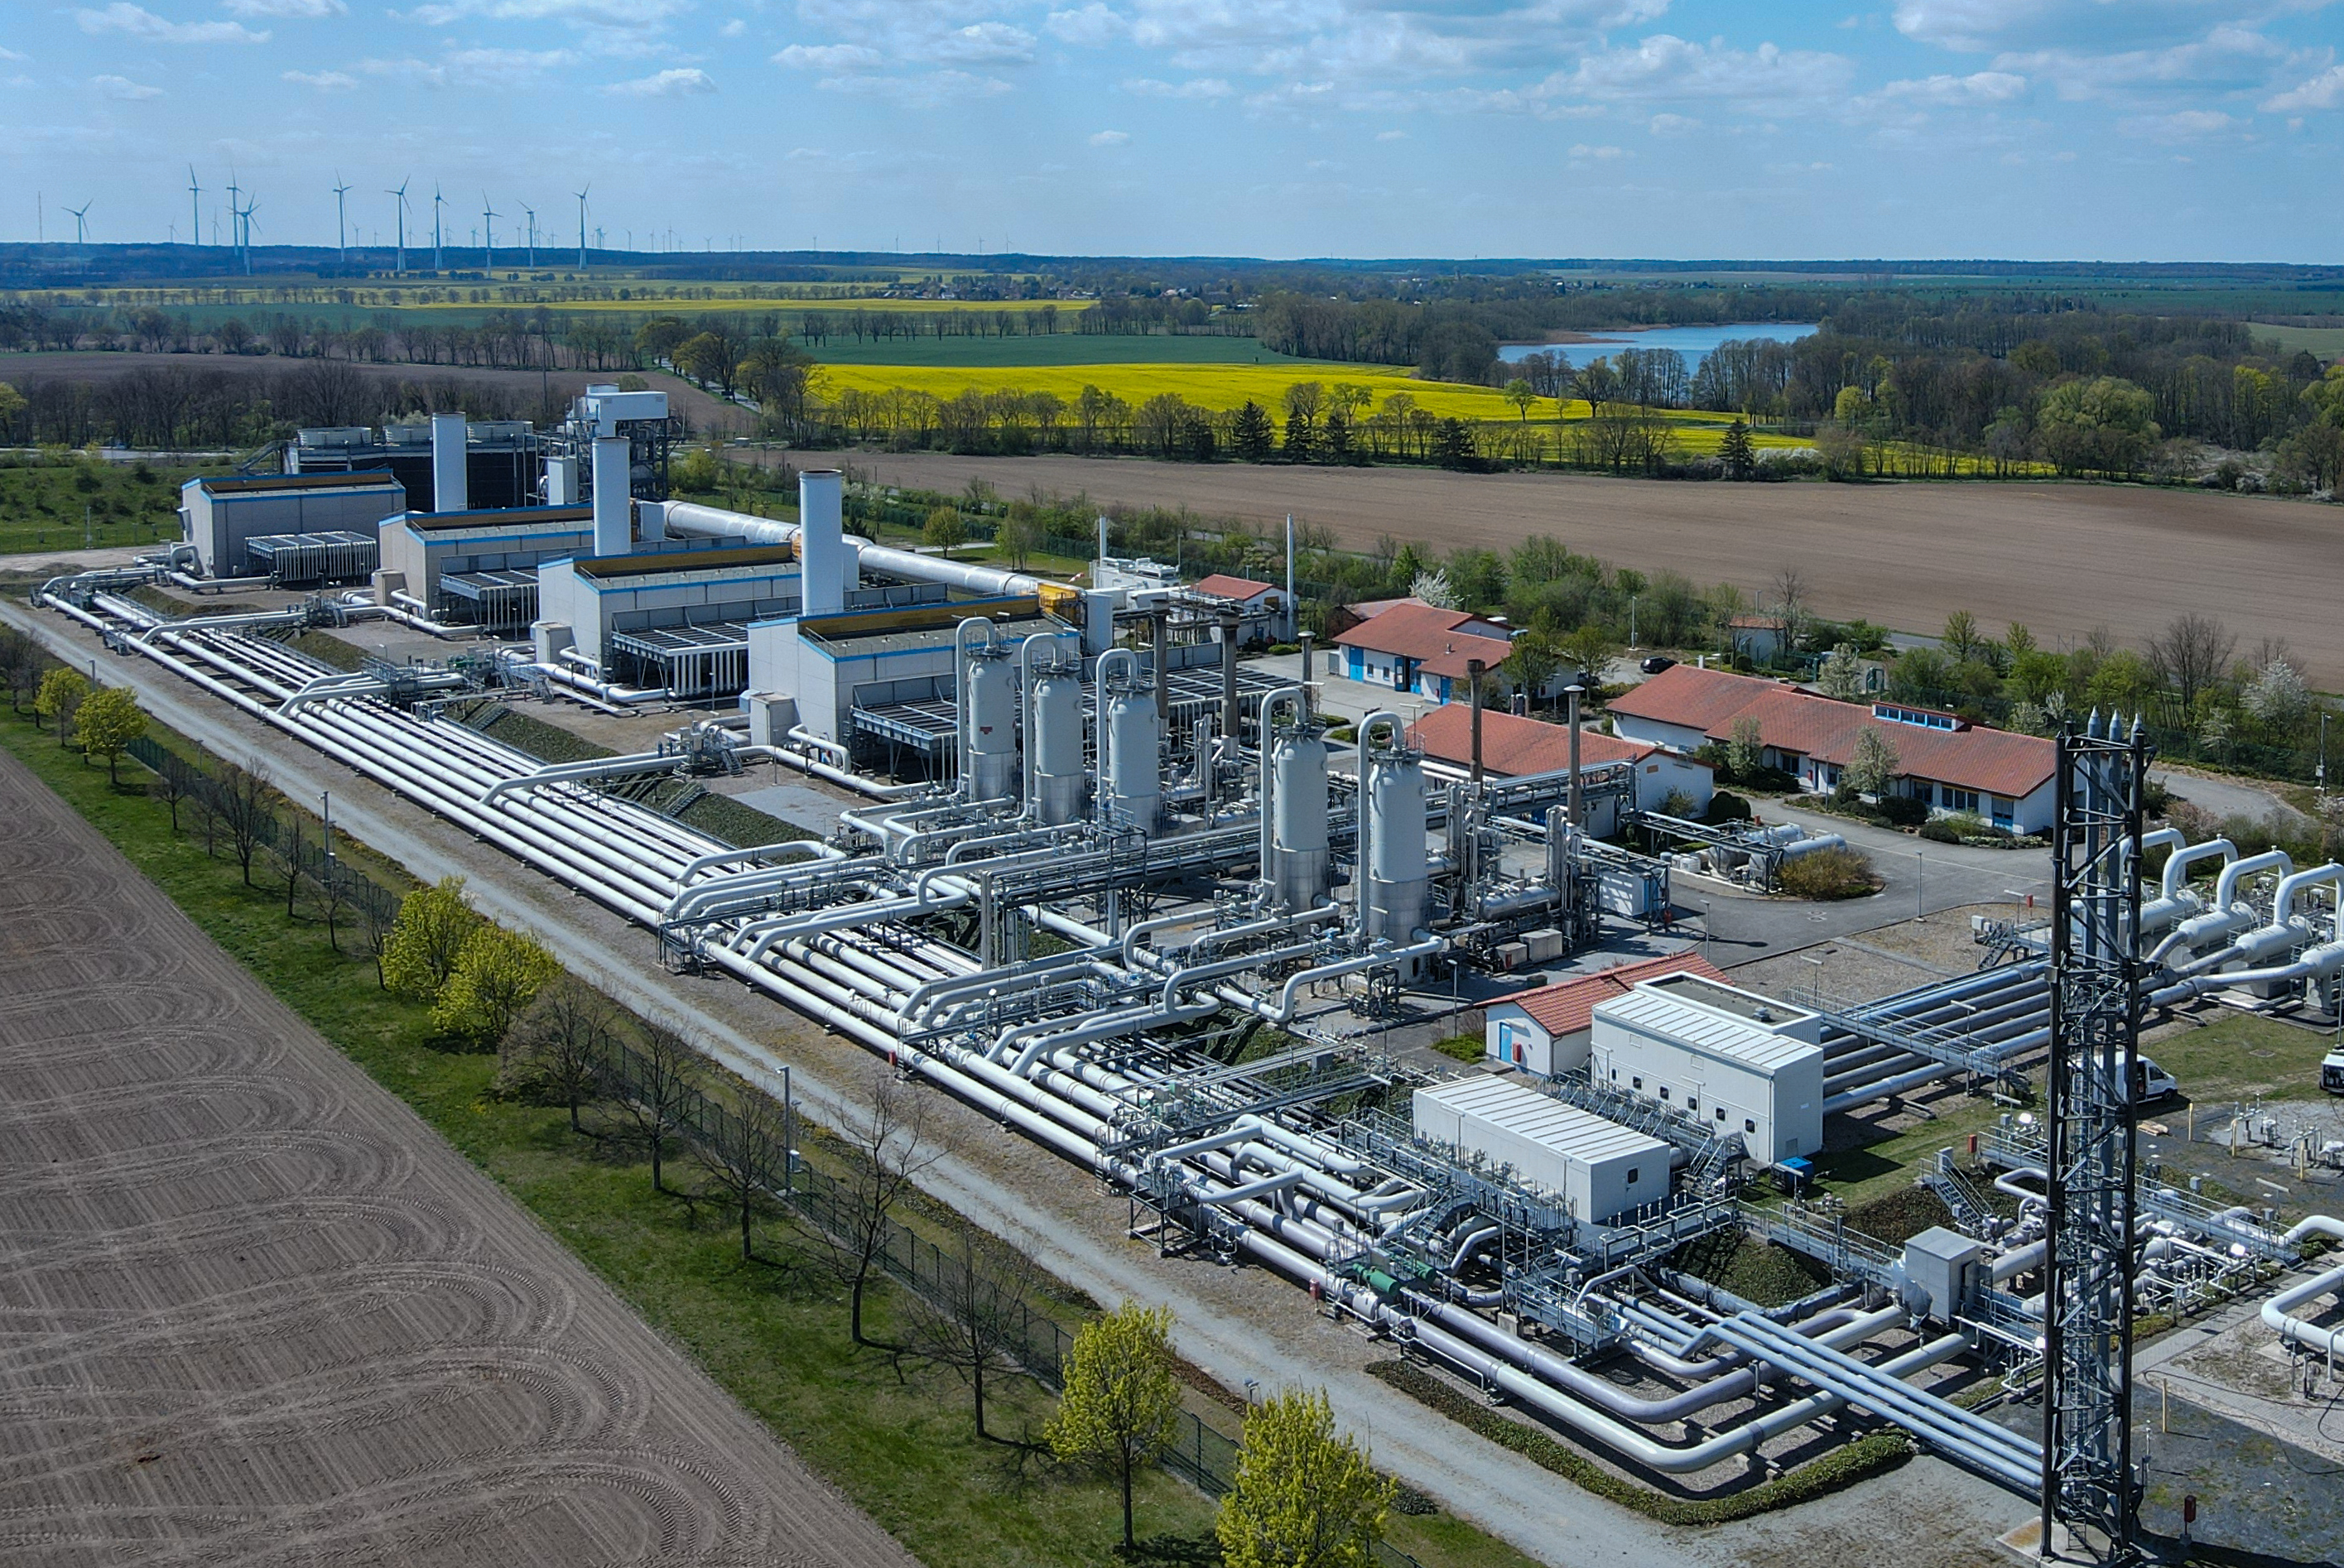 The Mallnow natural gas compressor station of Gascade Gastransport GmbH on April 27, in Brandenburg, Germany. The compressor station in Mallnow near the German-Polish border mainly receives Russian natural gas. 